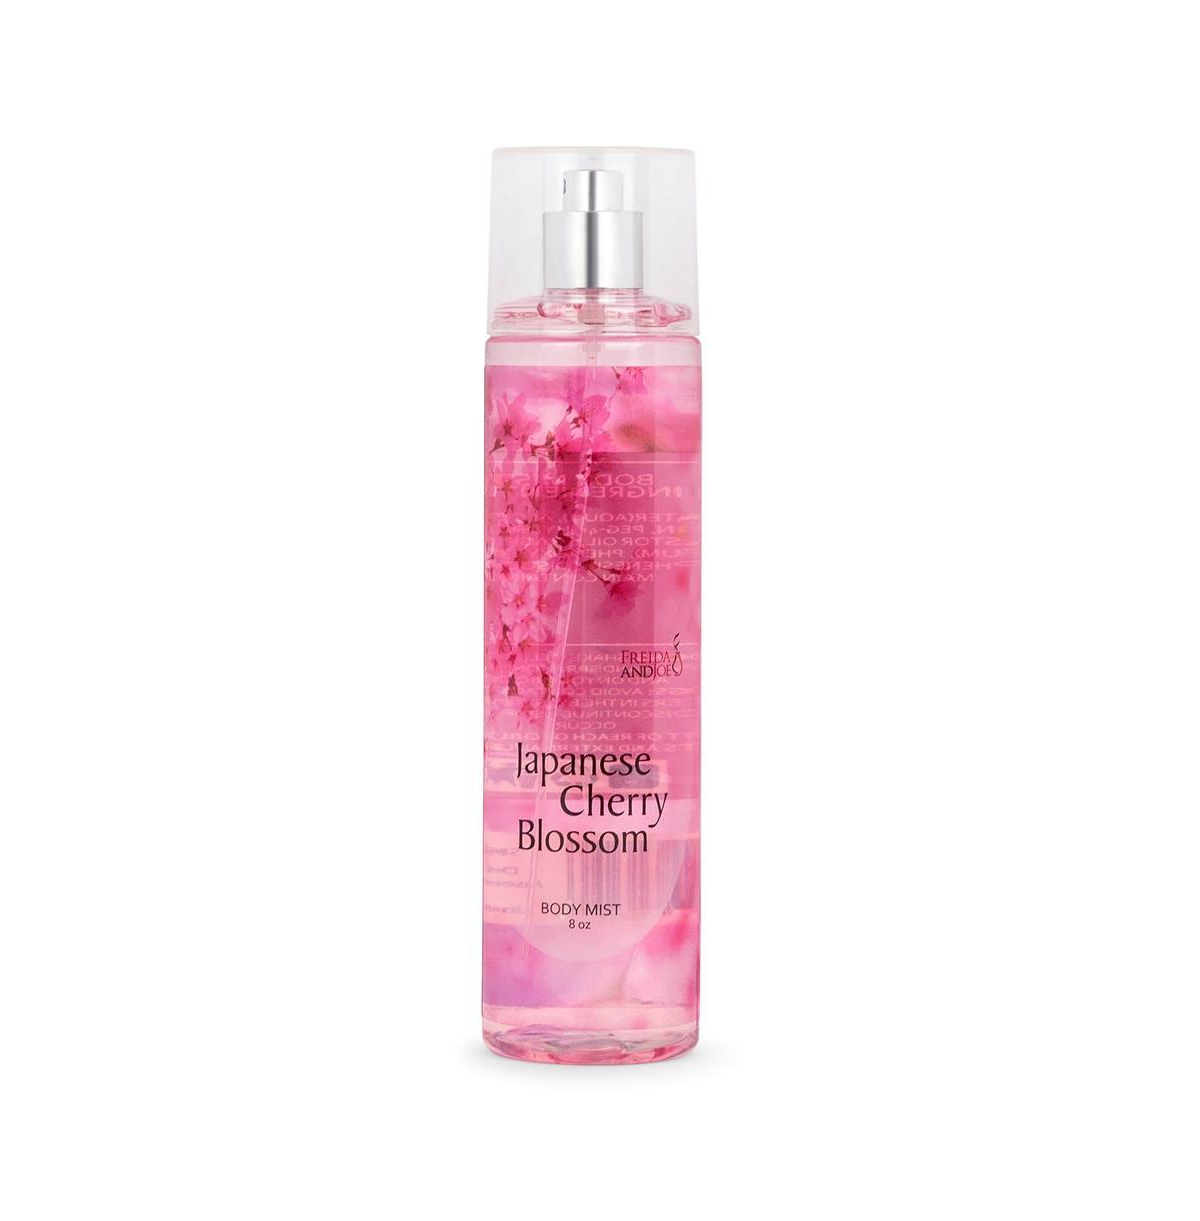 Japanese Cherry Blossom Fine Fragrance Body Mist in 8oz Spray Bottle Luxury Body Care Mothers Day Gifts for Mom - Pink